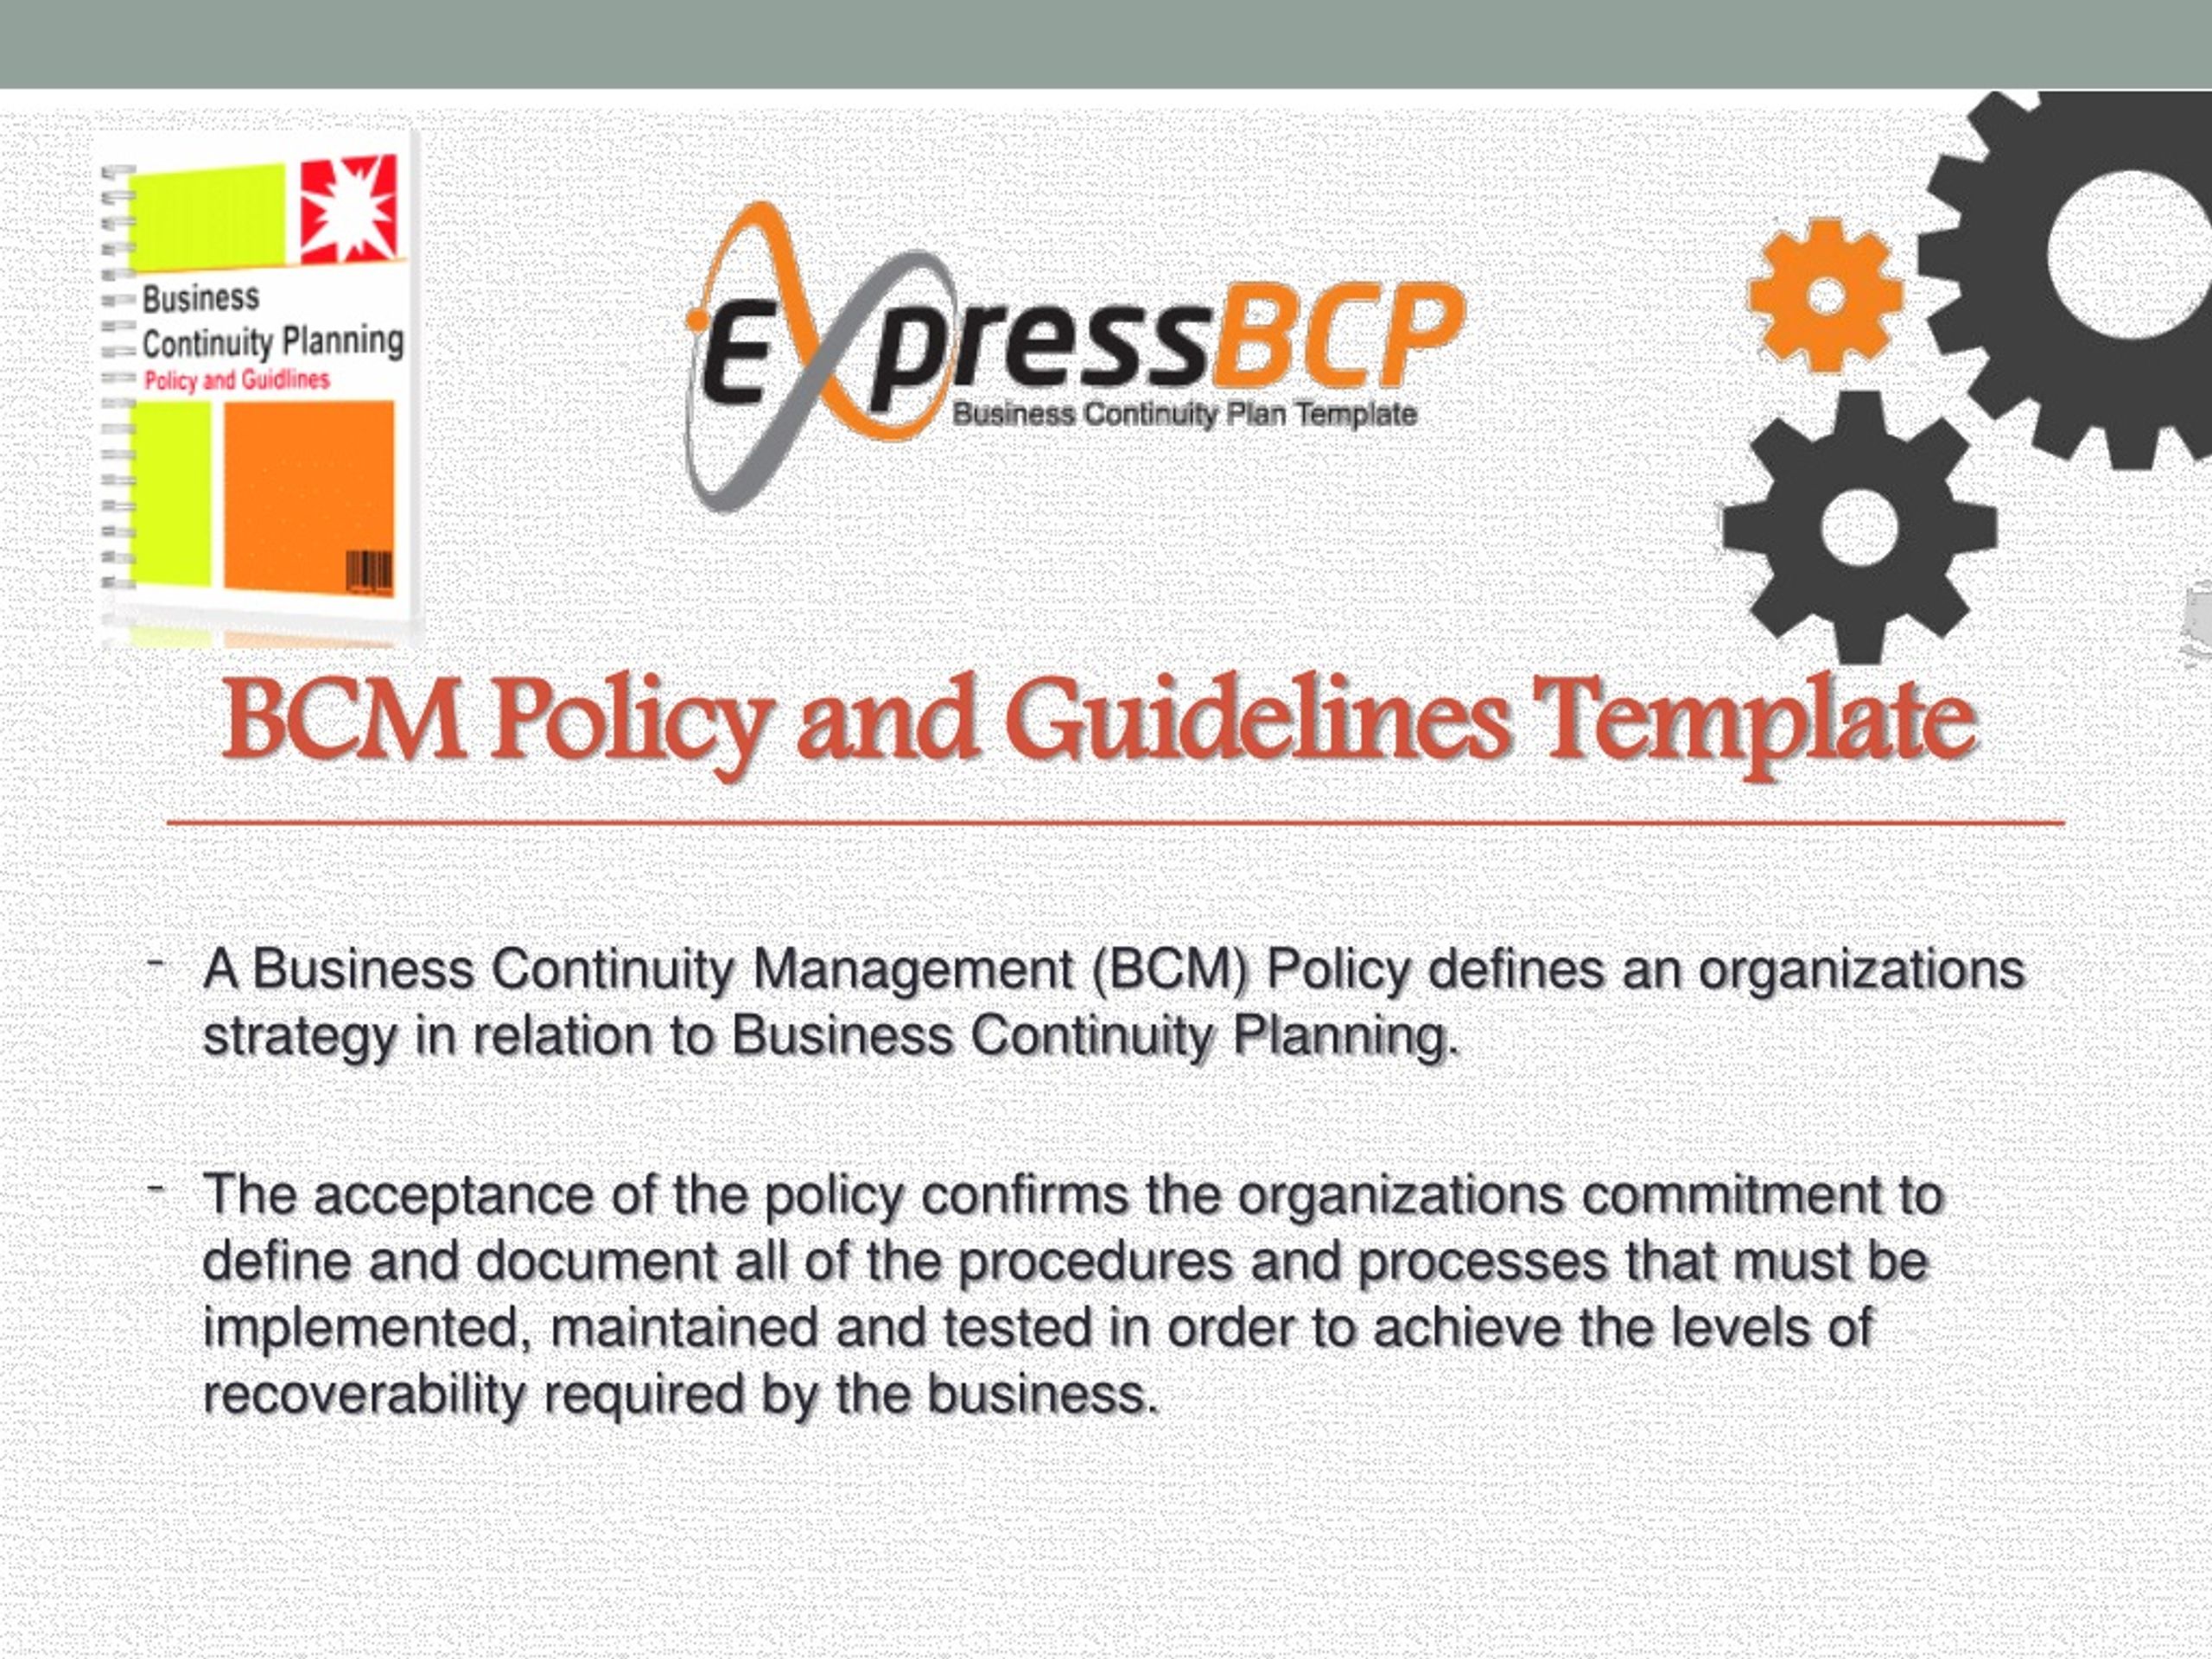 PPT Express BCP : Business Continuity Plan Template PowerPoint